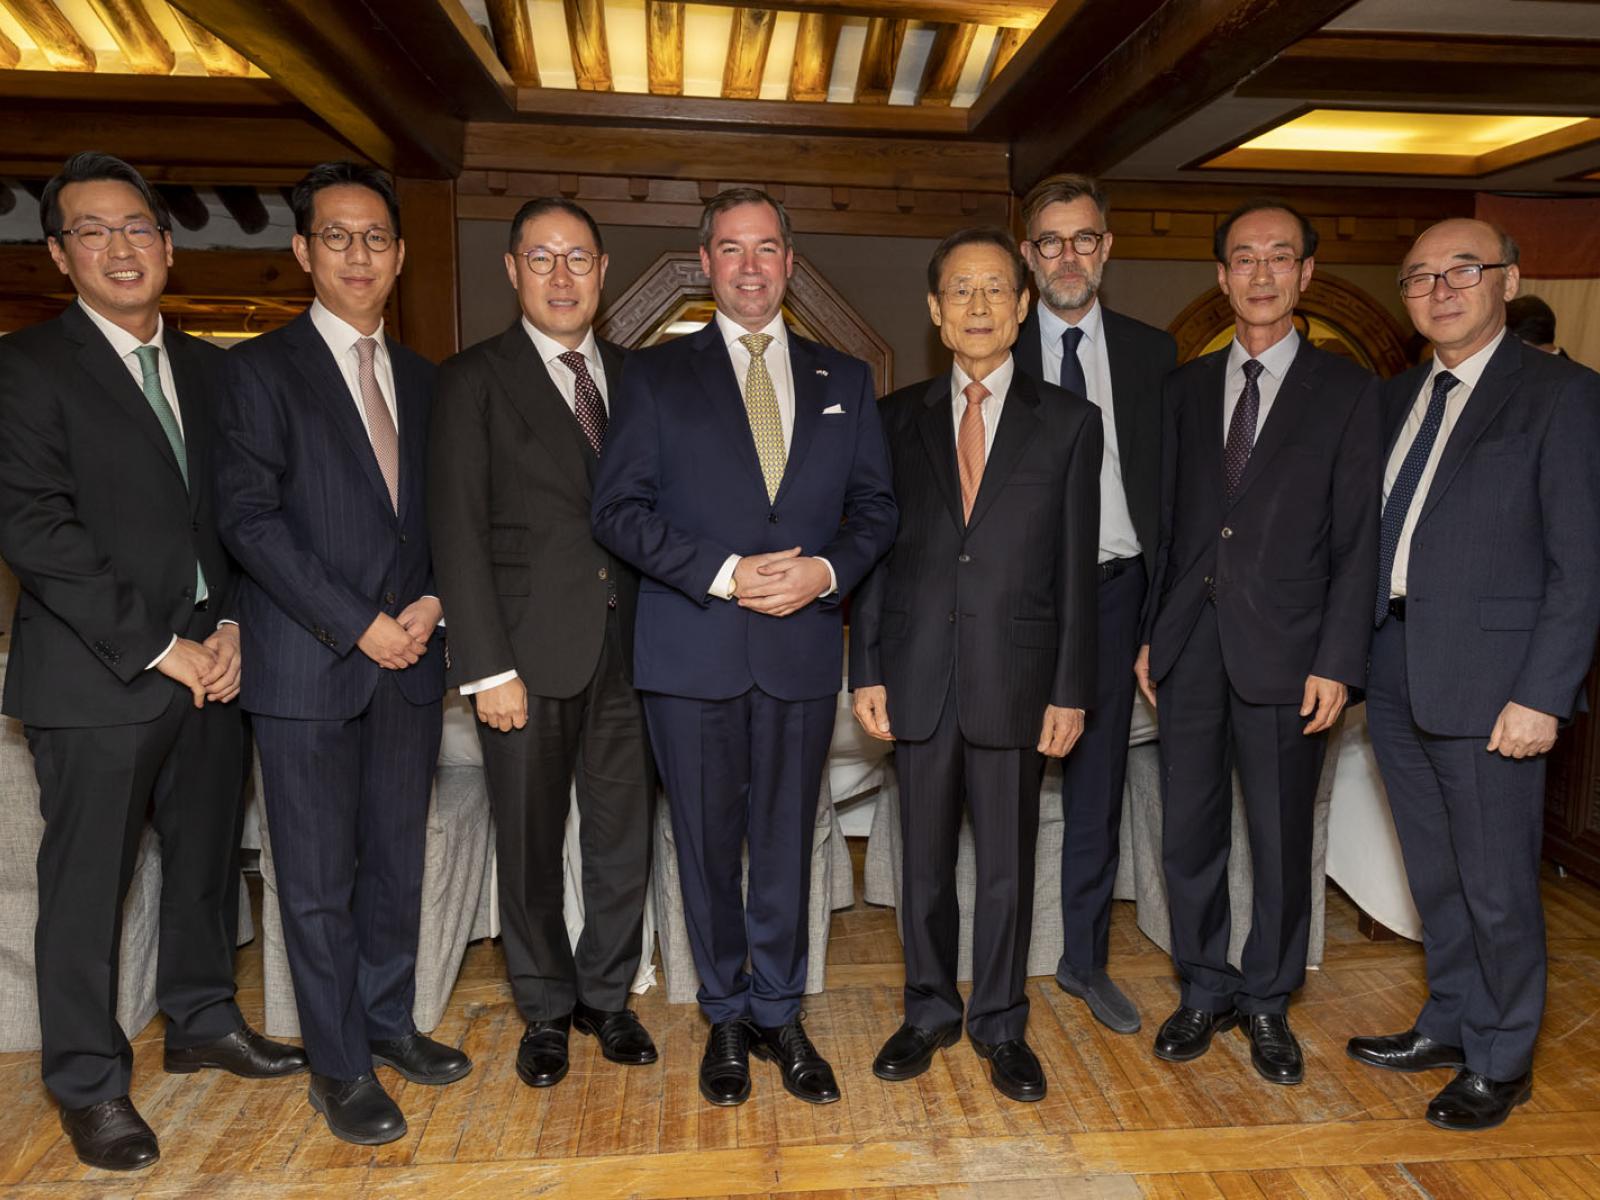 Souvenir picture with representatives of Korean companies established in Luxembourg